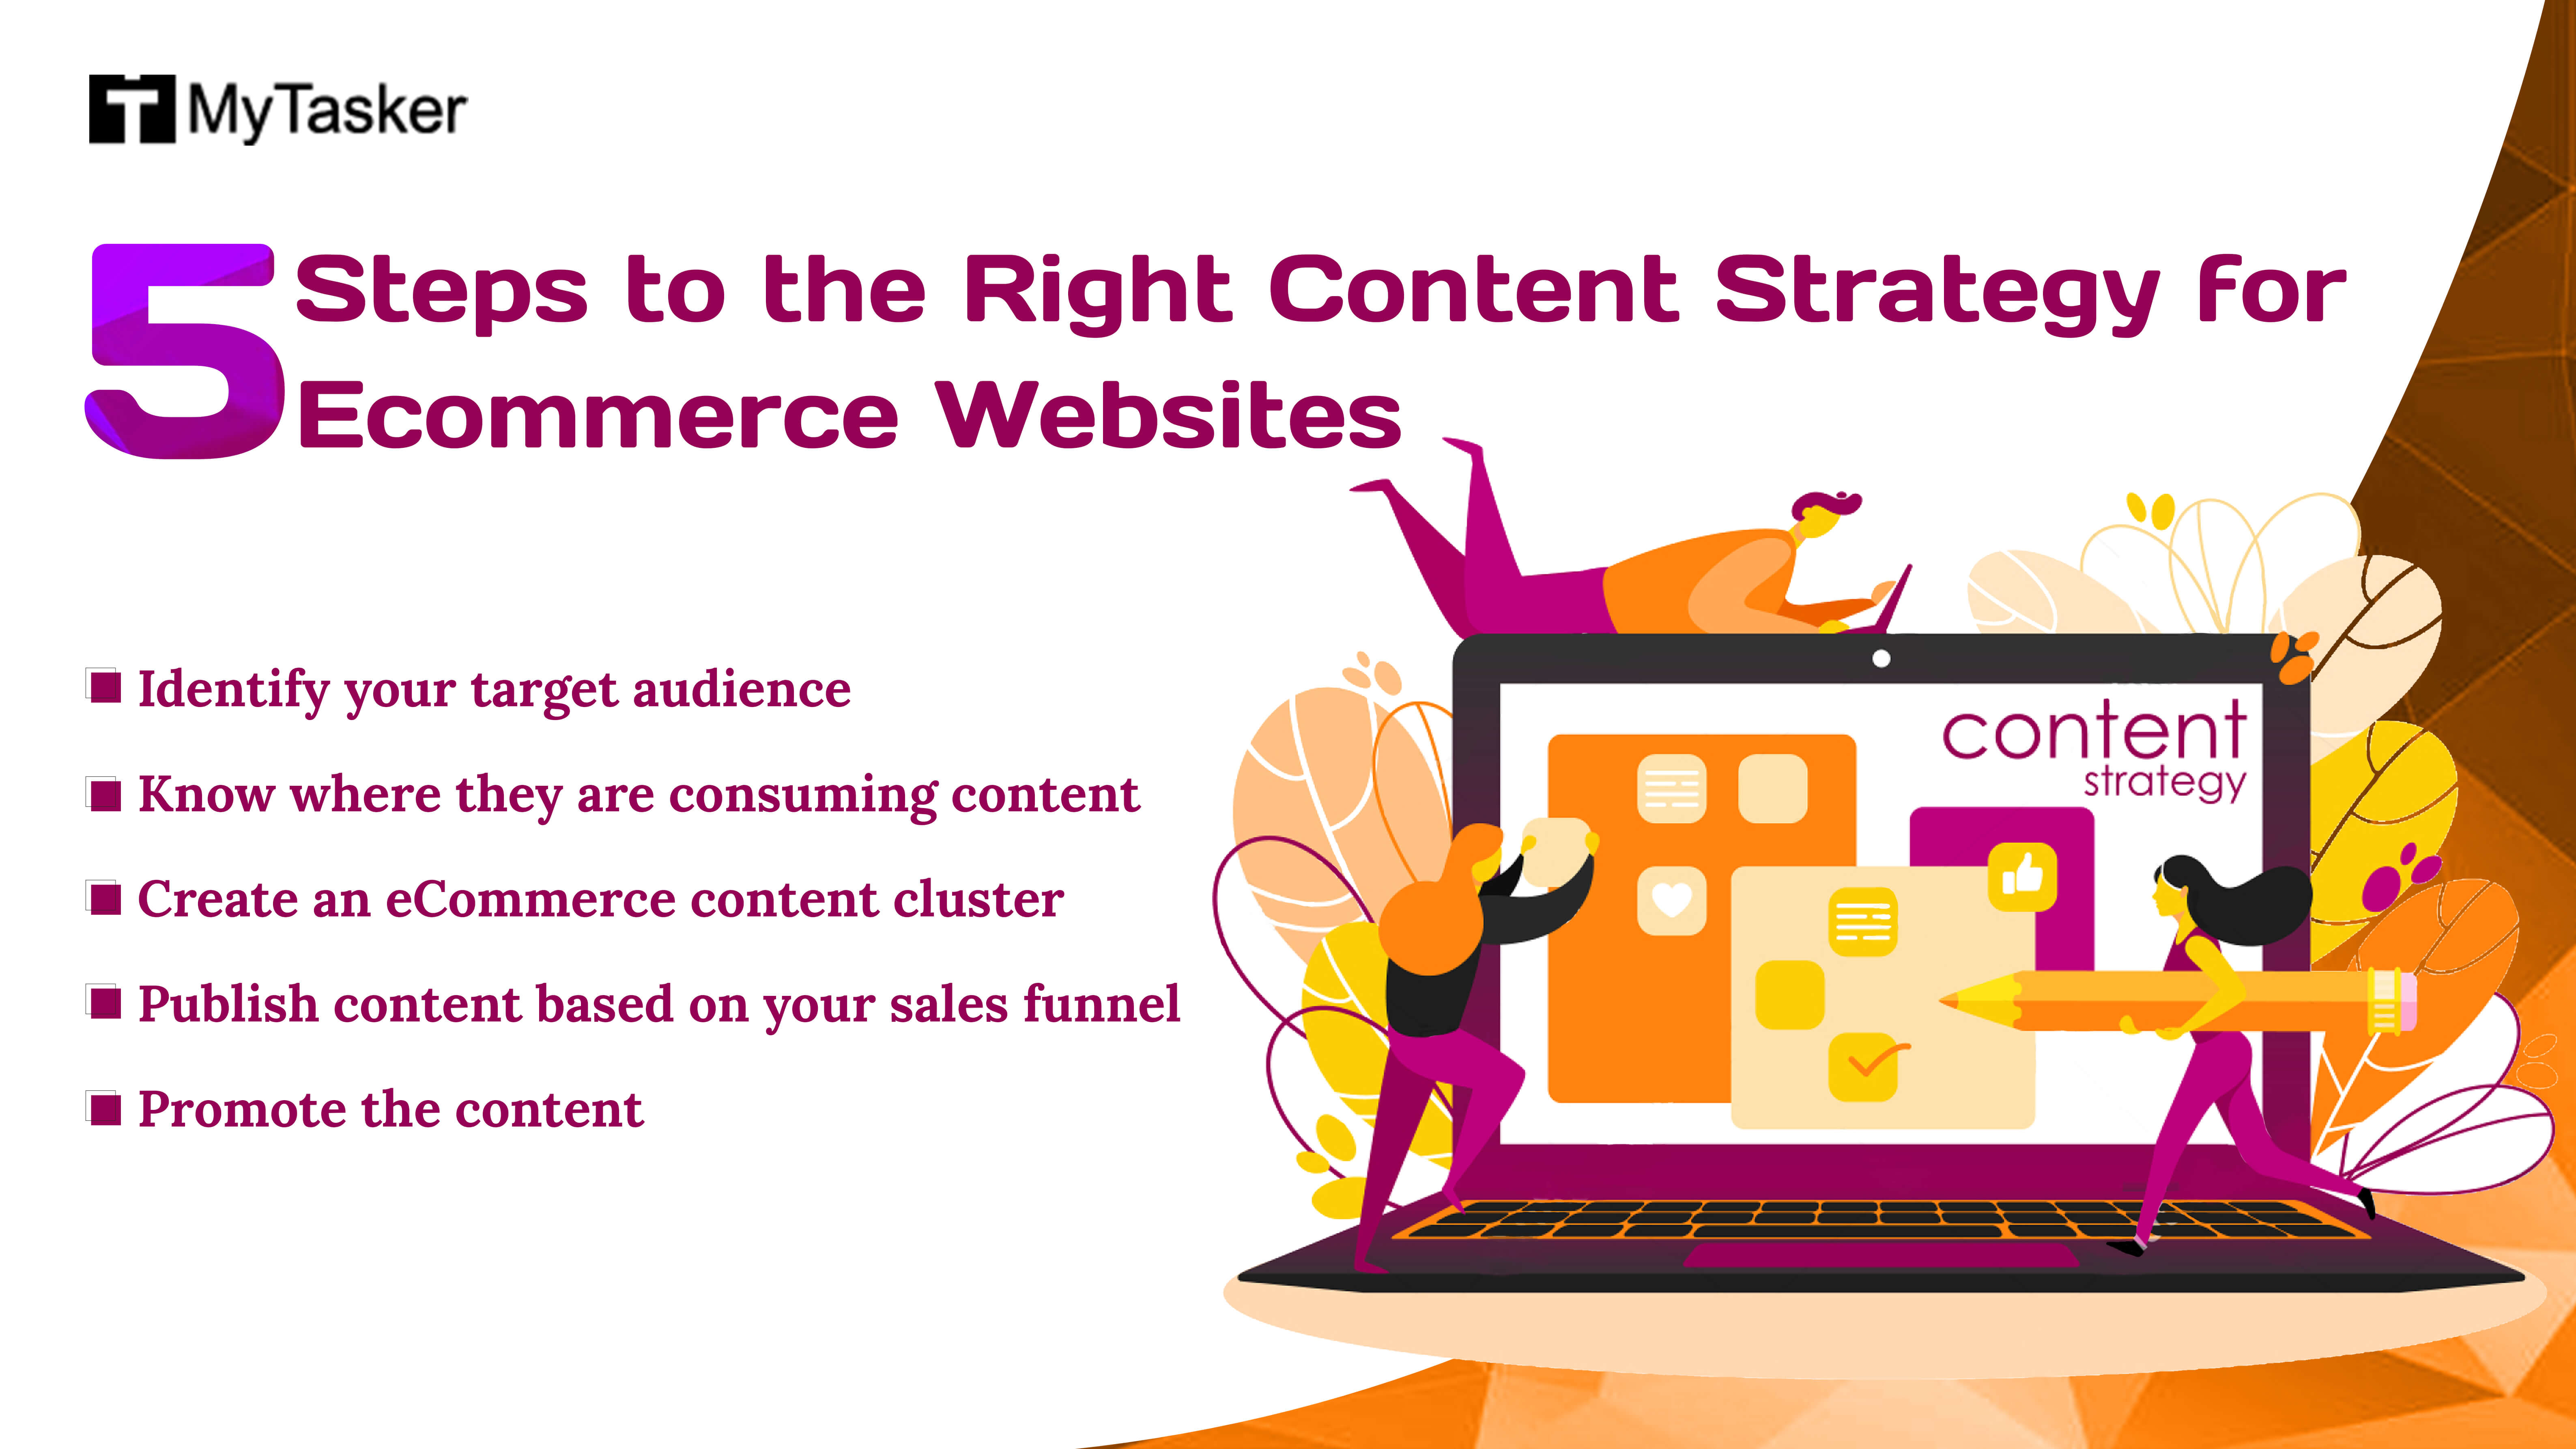 5 Steps to the Right Content Strategy for Ecommerce Websites